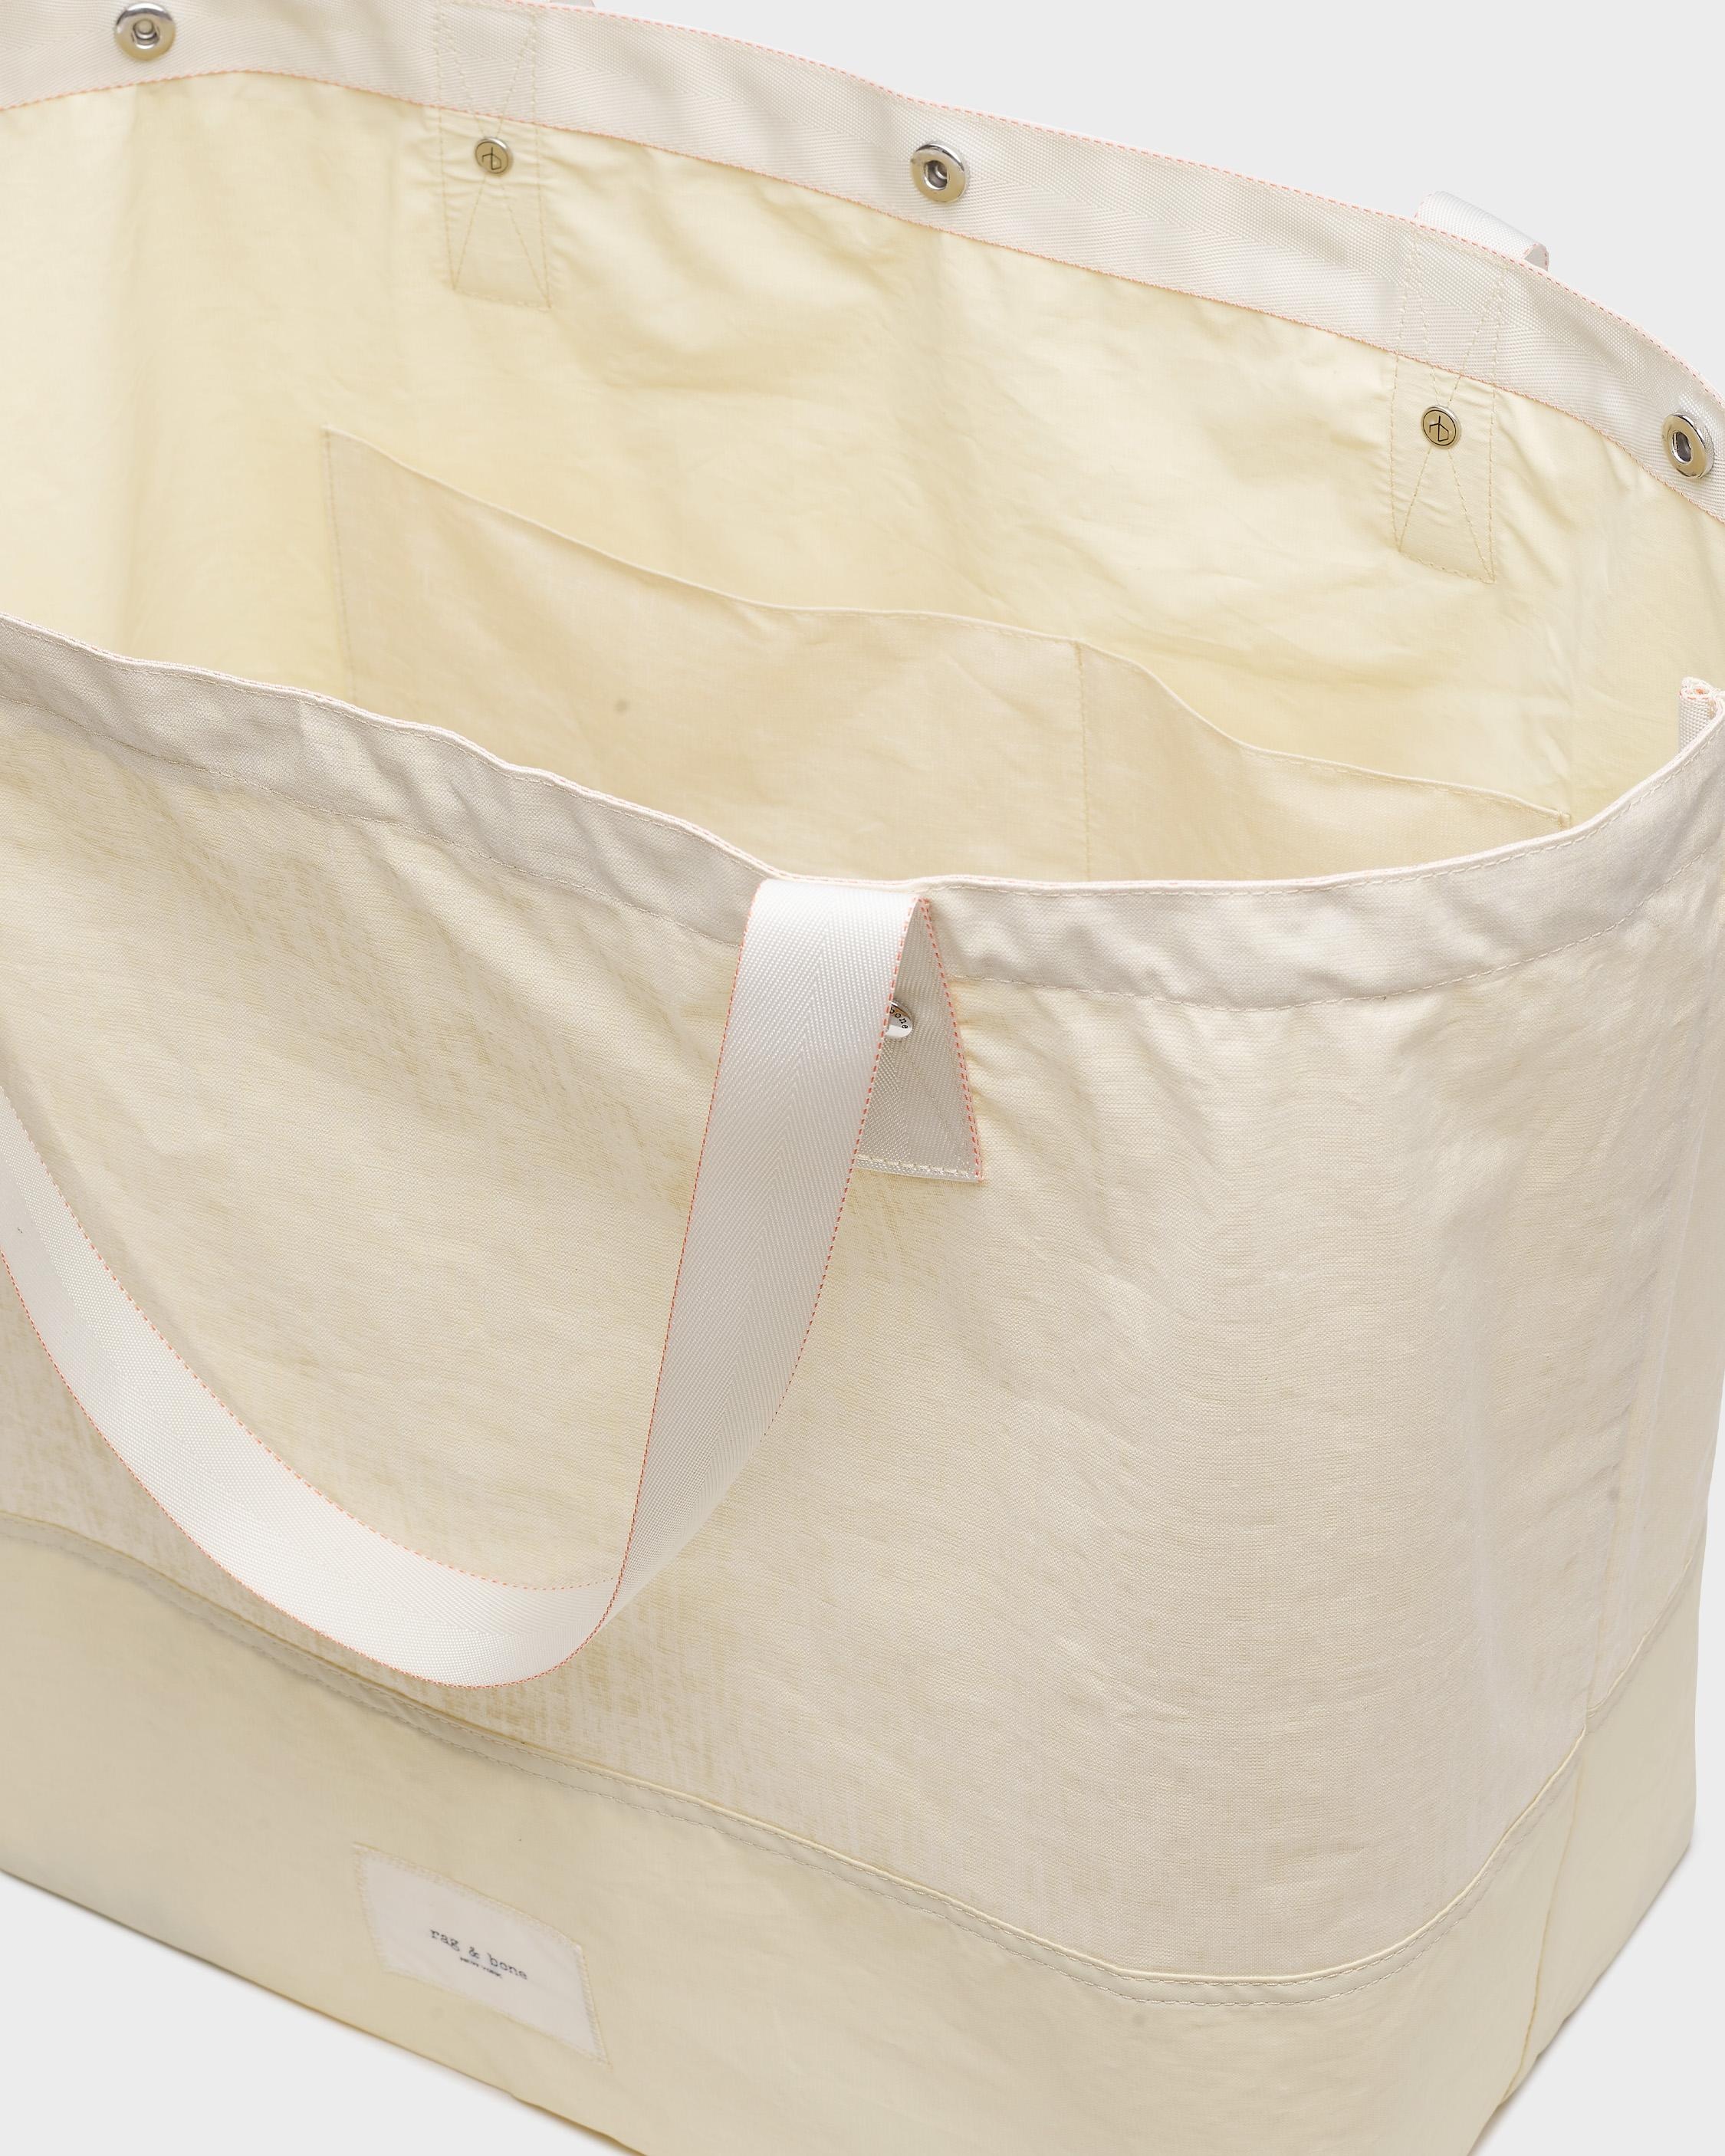 Addison Oversized Tote - Linen
Extra Large Tote - 4